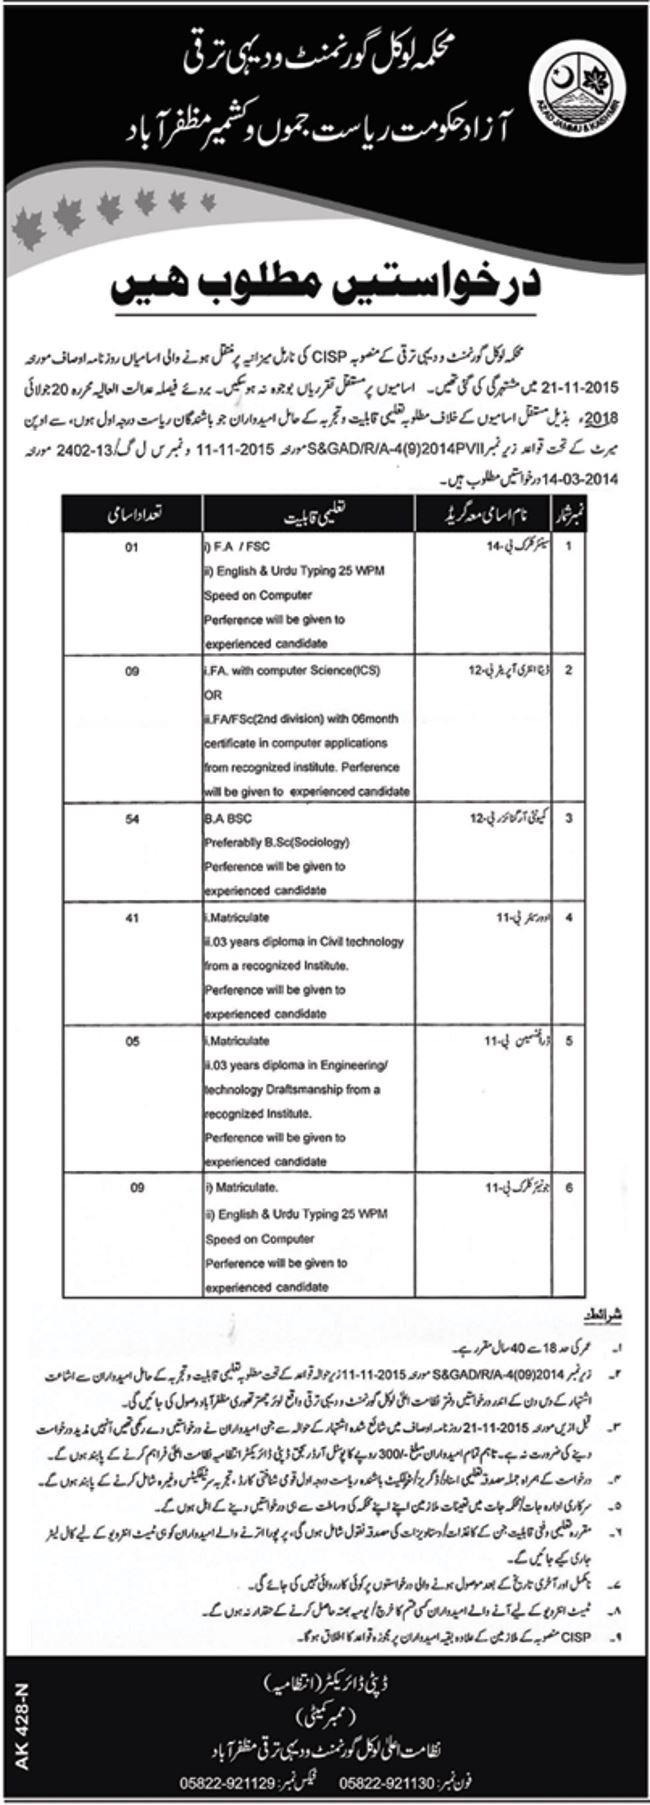 Local & Rural Development Department AJK Jobs 2019 For 183+ DEOs, Clerks, Community Organizers, Overseers & Other Posts